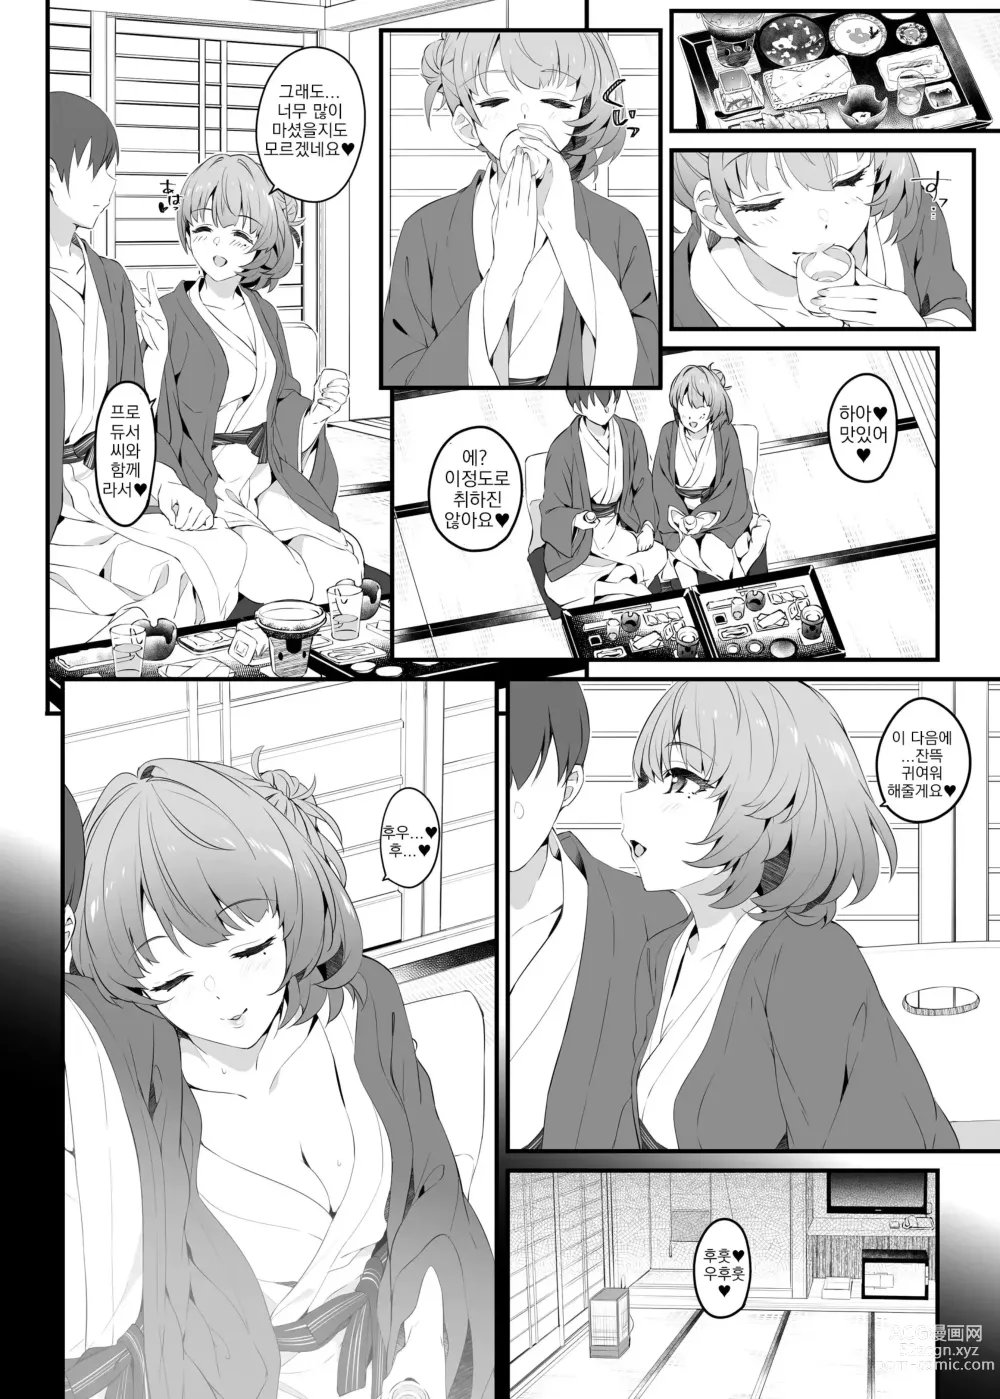 Page 8 of doujinshi Flowers blooming at night and the kings in the dream.